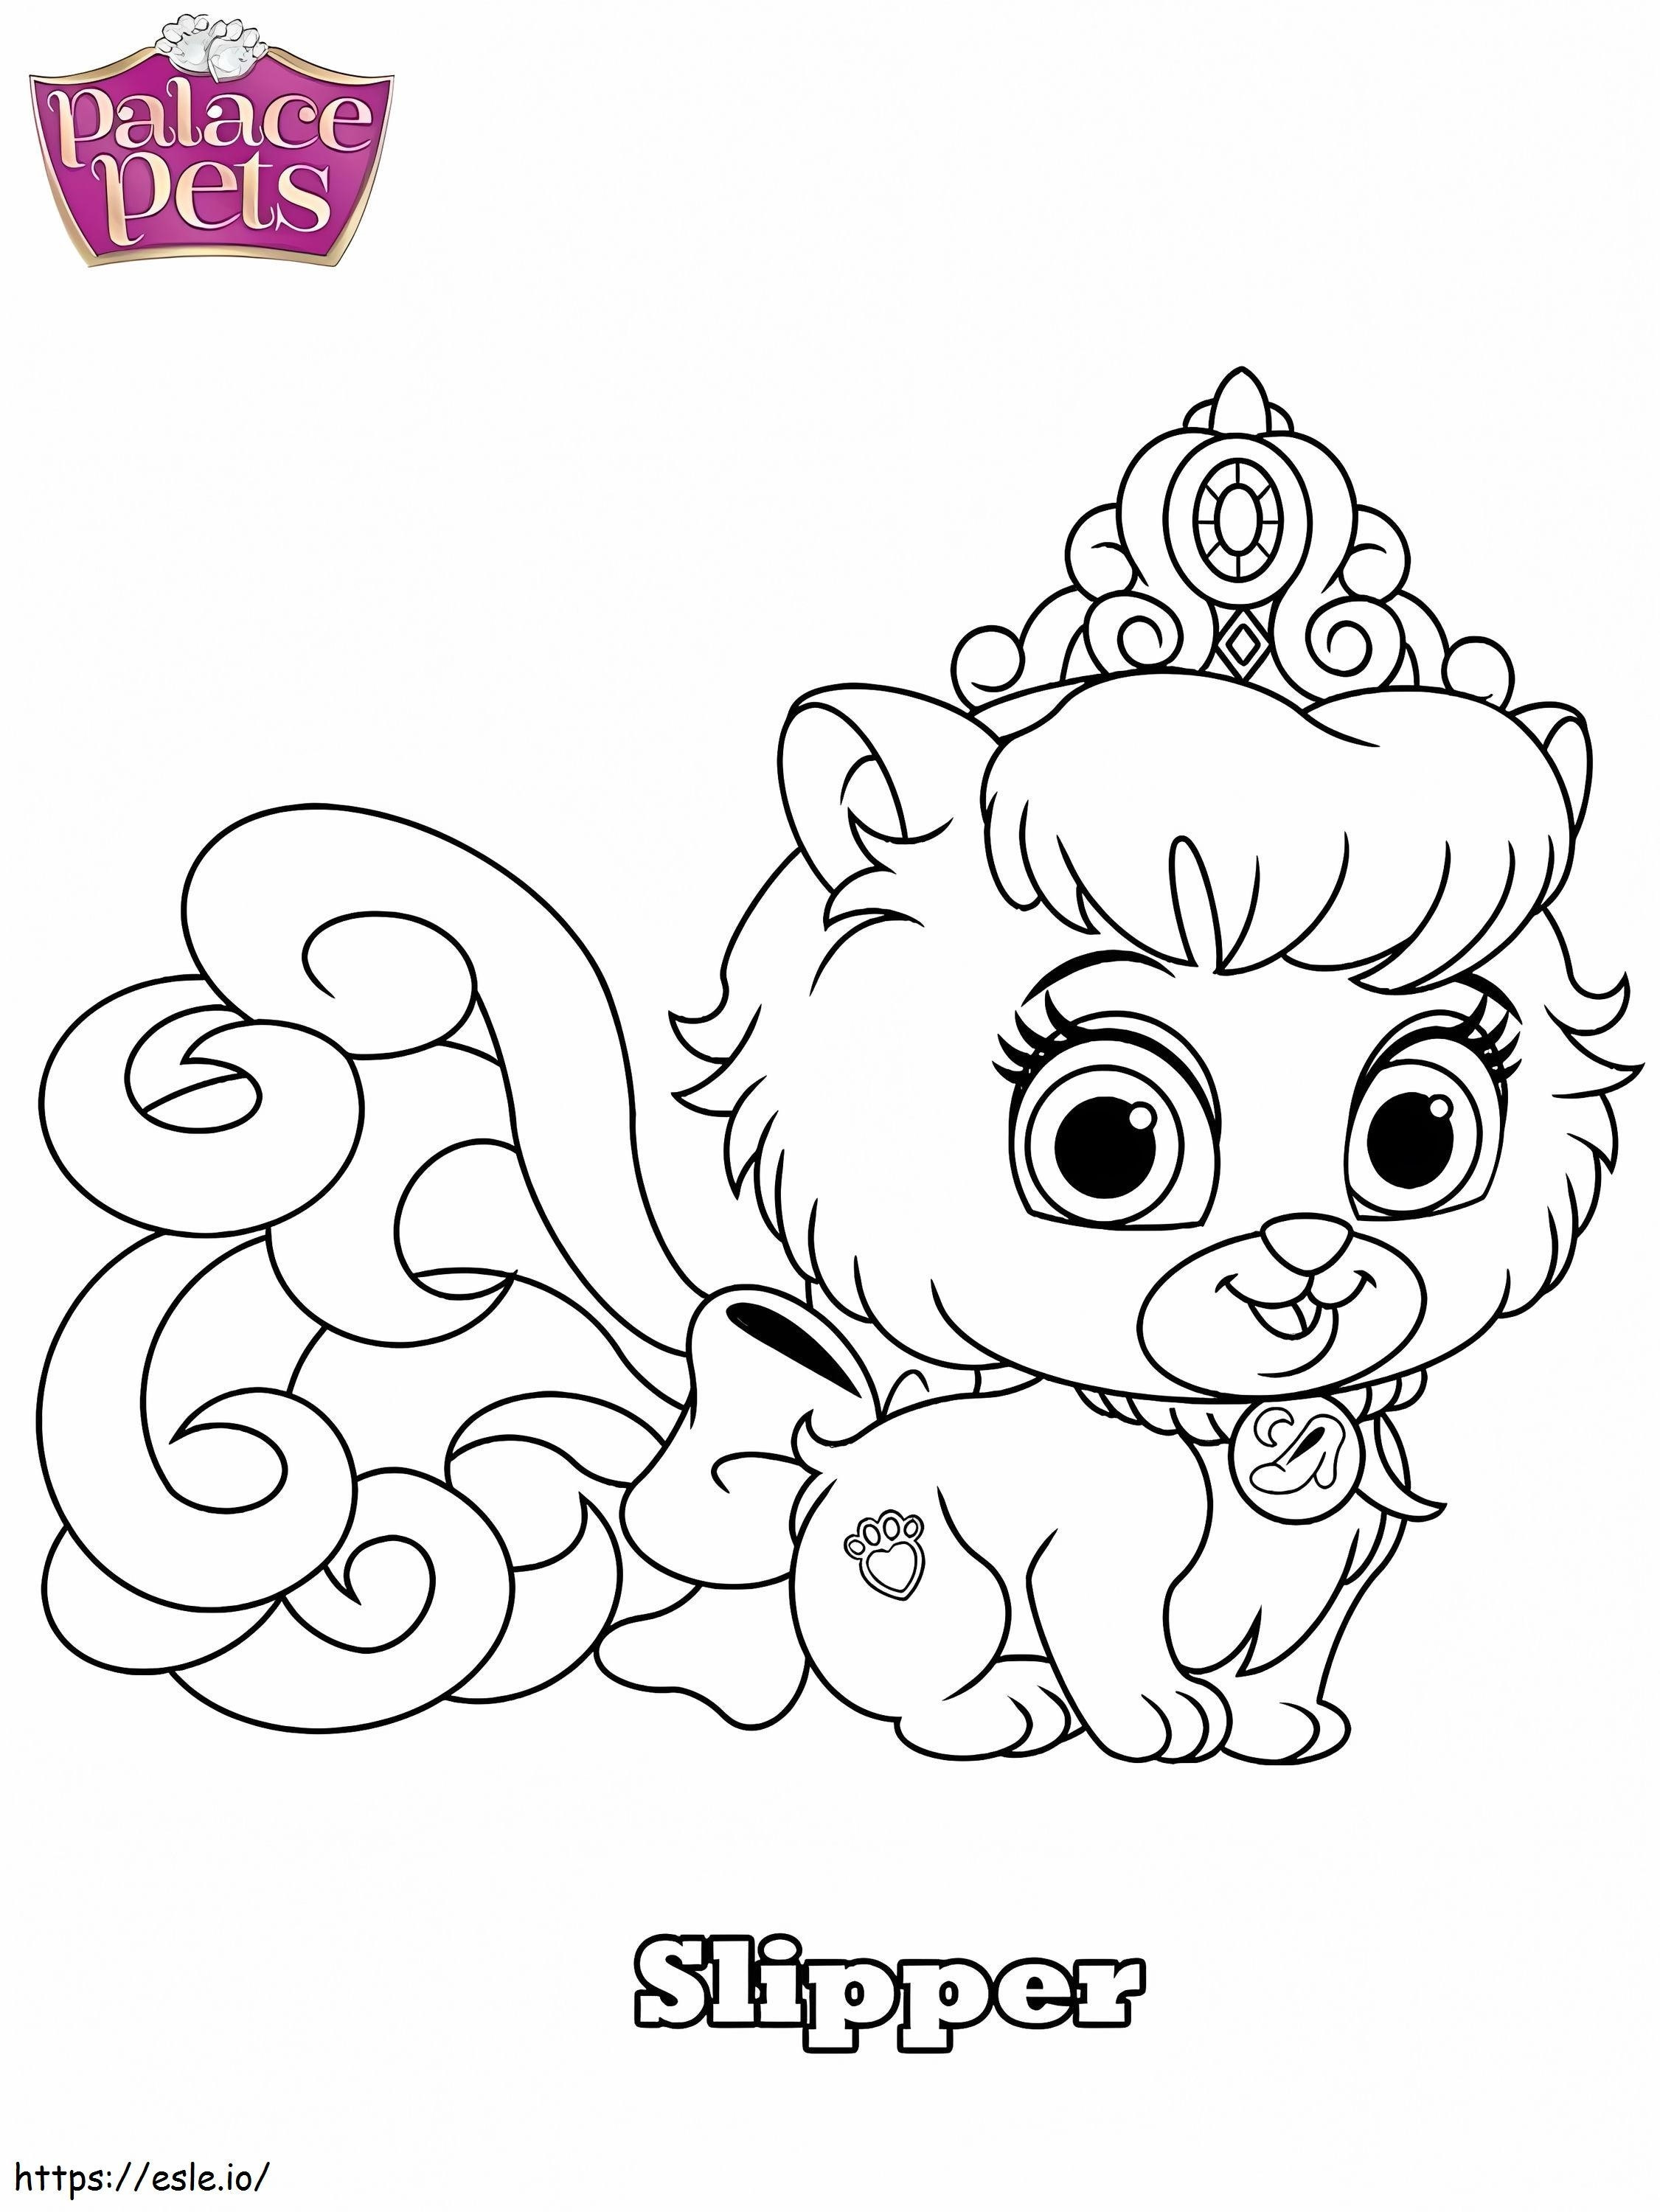 1587087820 Palace Pets Slipper coloring page